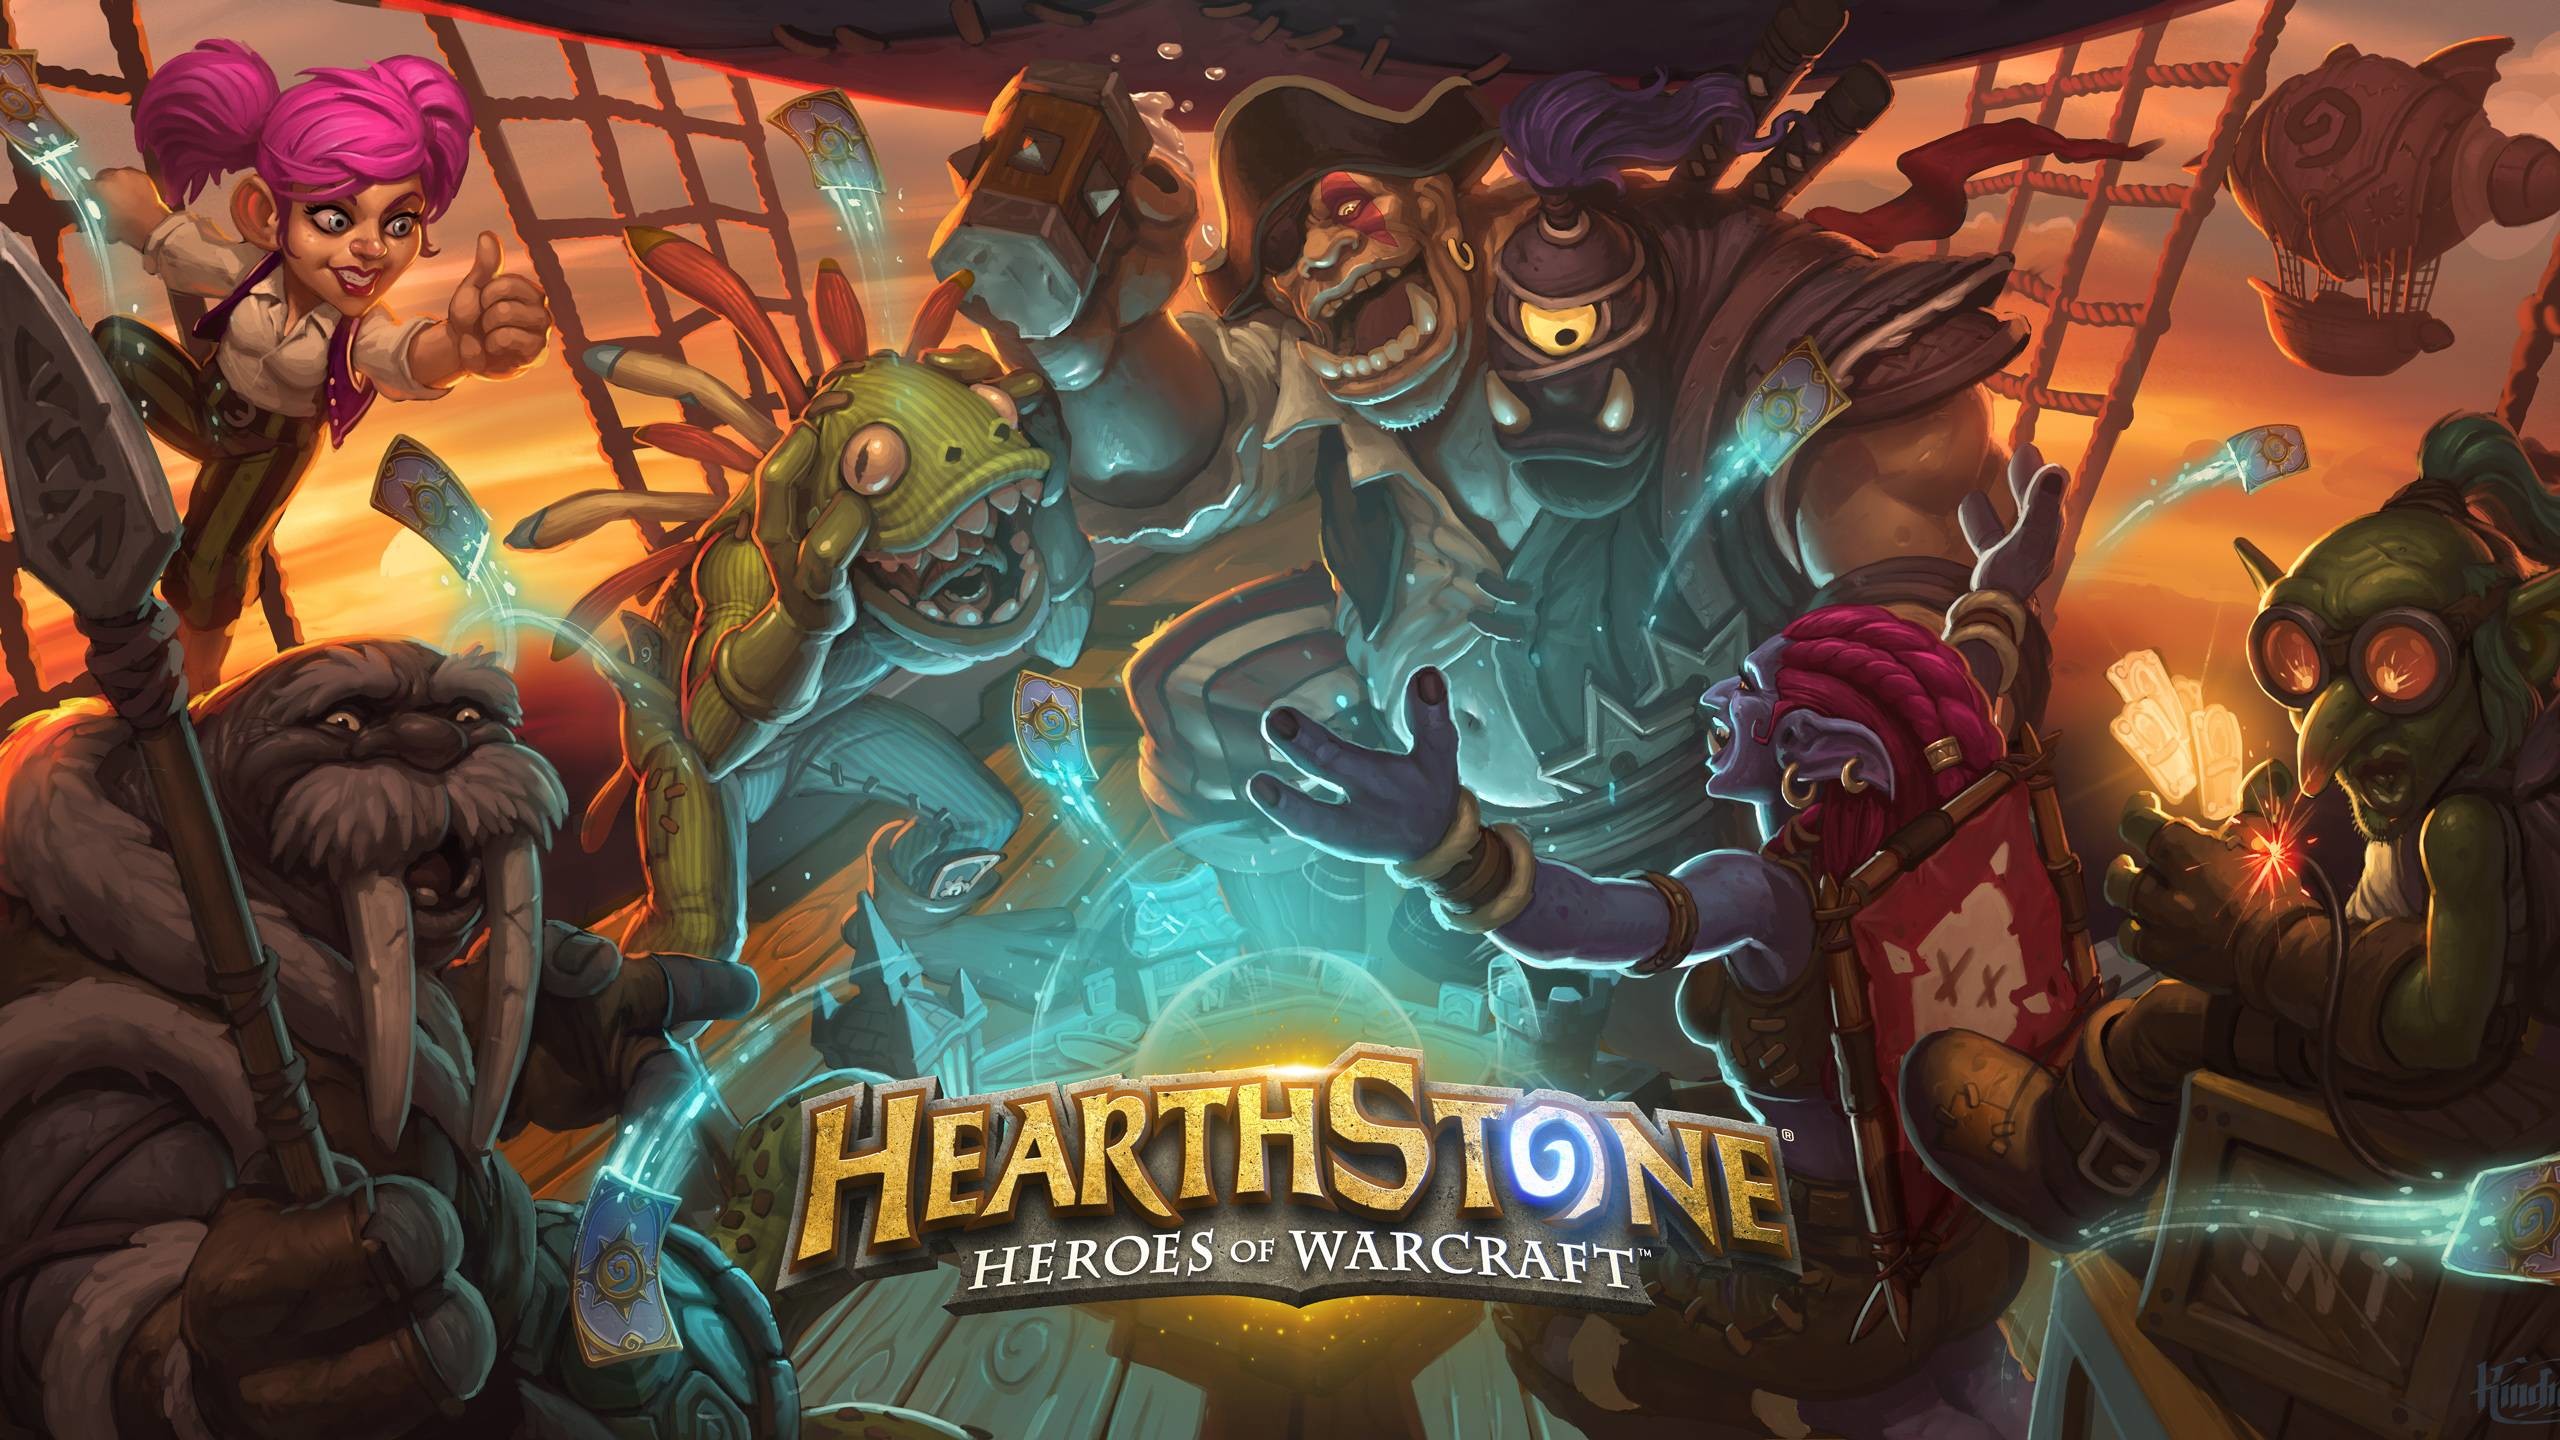 No One Seems To Have Uploaded This Yet, So - Обои Hearthstone , HD Wallpaper & Backgrounds